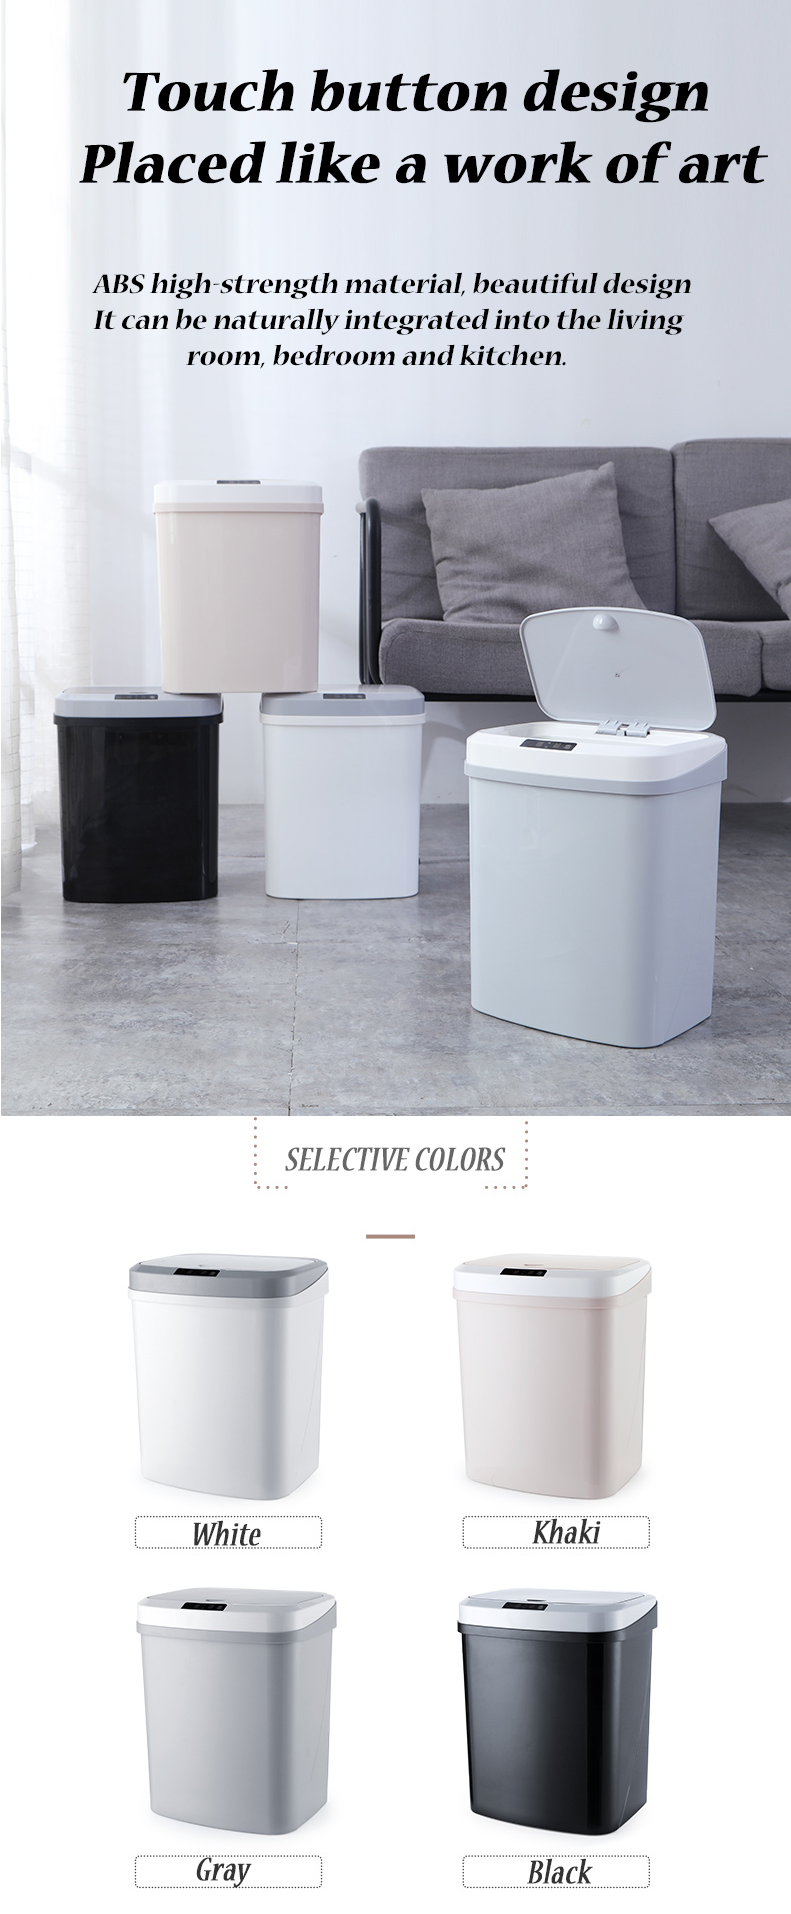 Meixun PD-6008 14L Intelligent Inductive Trash Can Inductive Open Waste Bins For Office Home Bathroom Kitchen Battery Powered